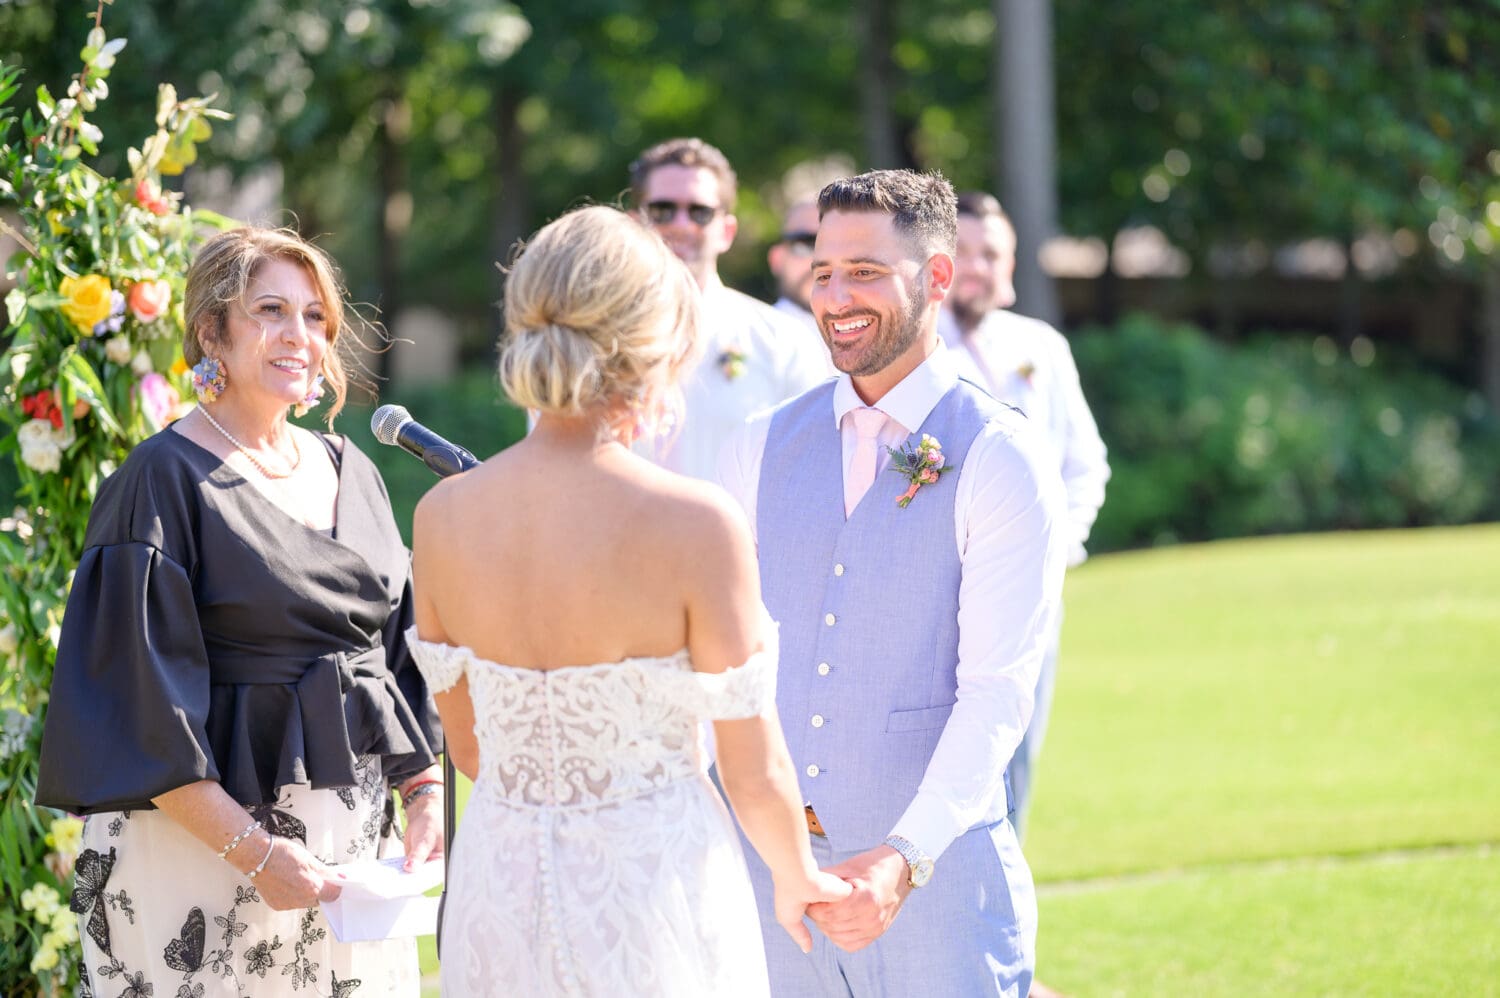 Big smiles during the vows - Pawleys Plantation Golf & Country Club